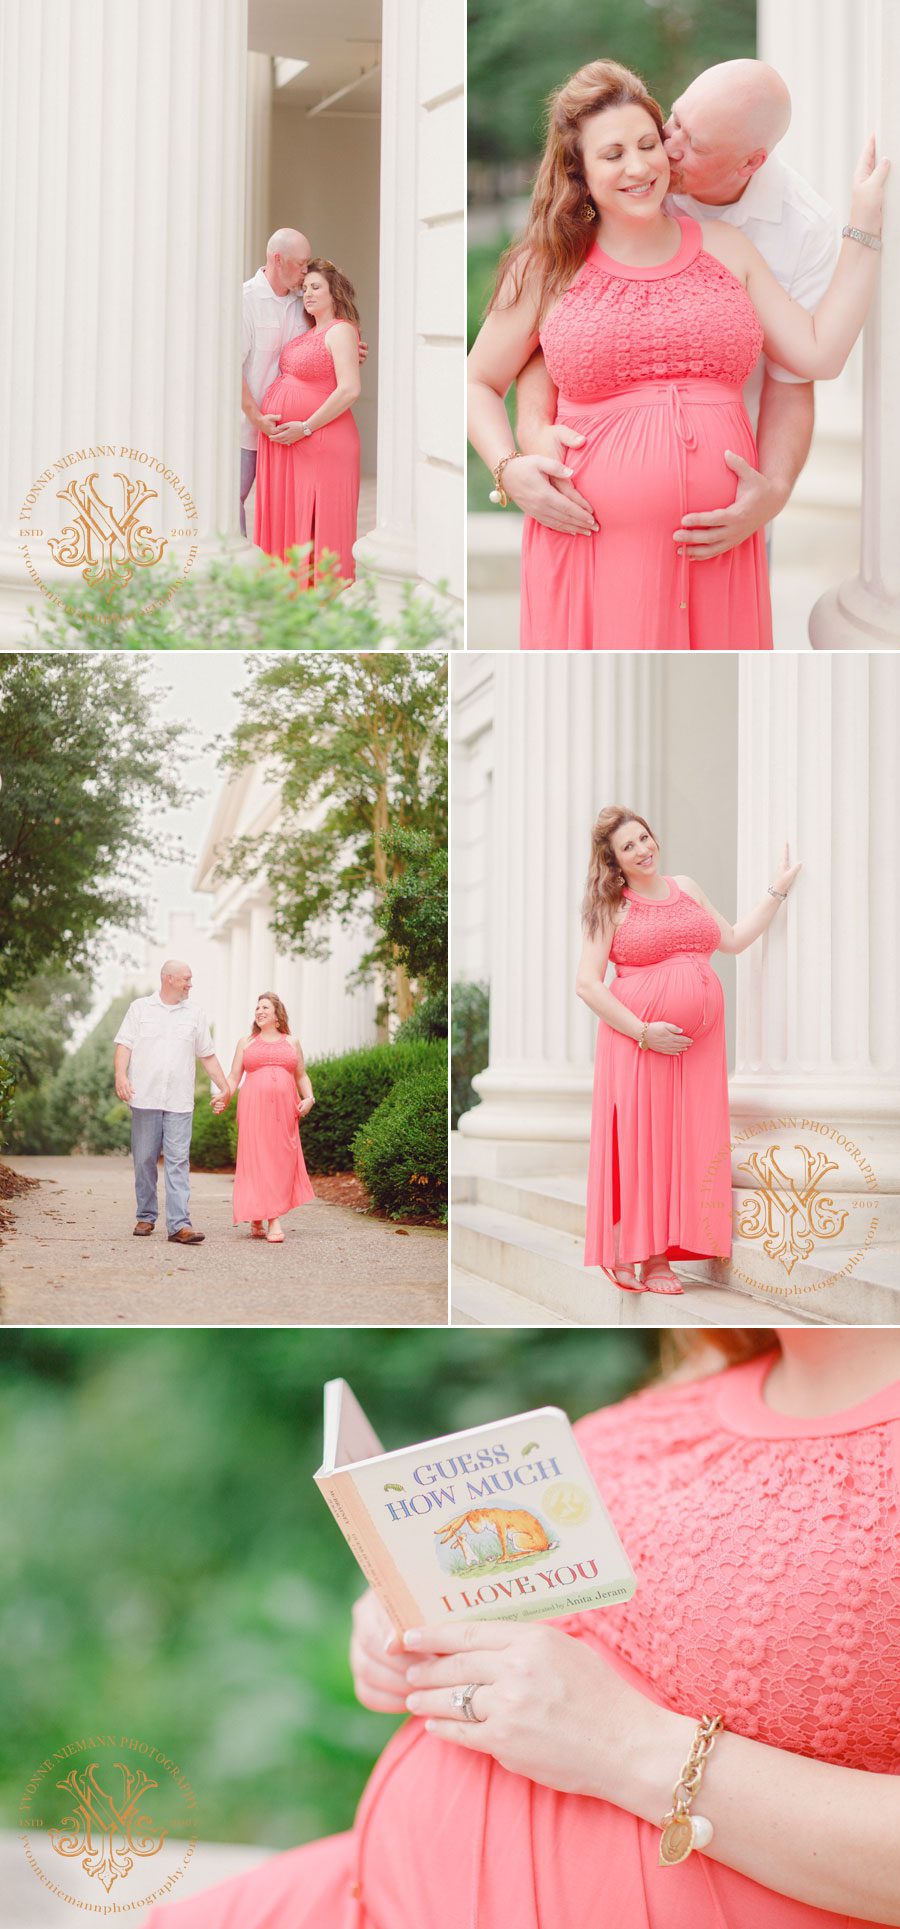 romance in pregnancy photos on UGA North campus in Athens, GA.